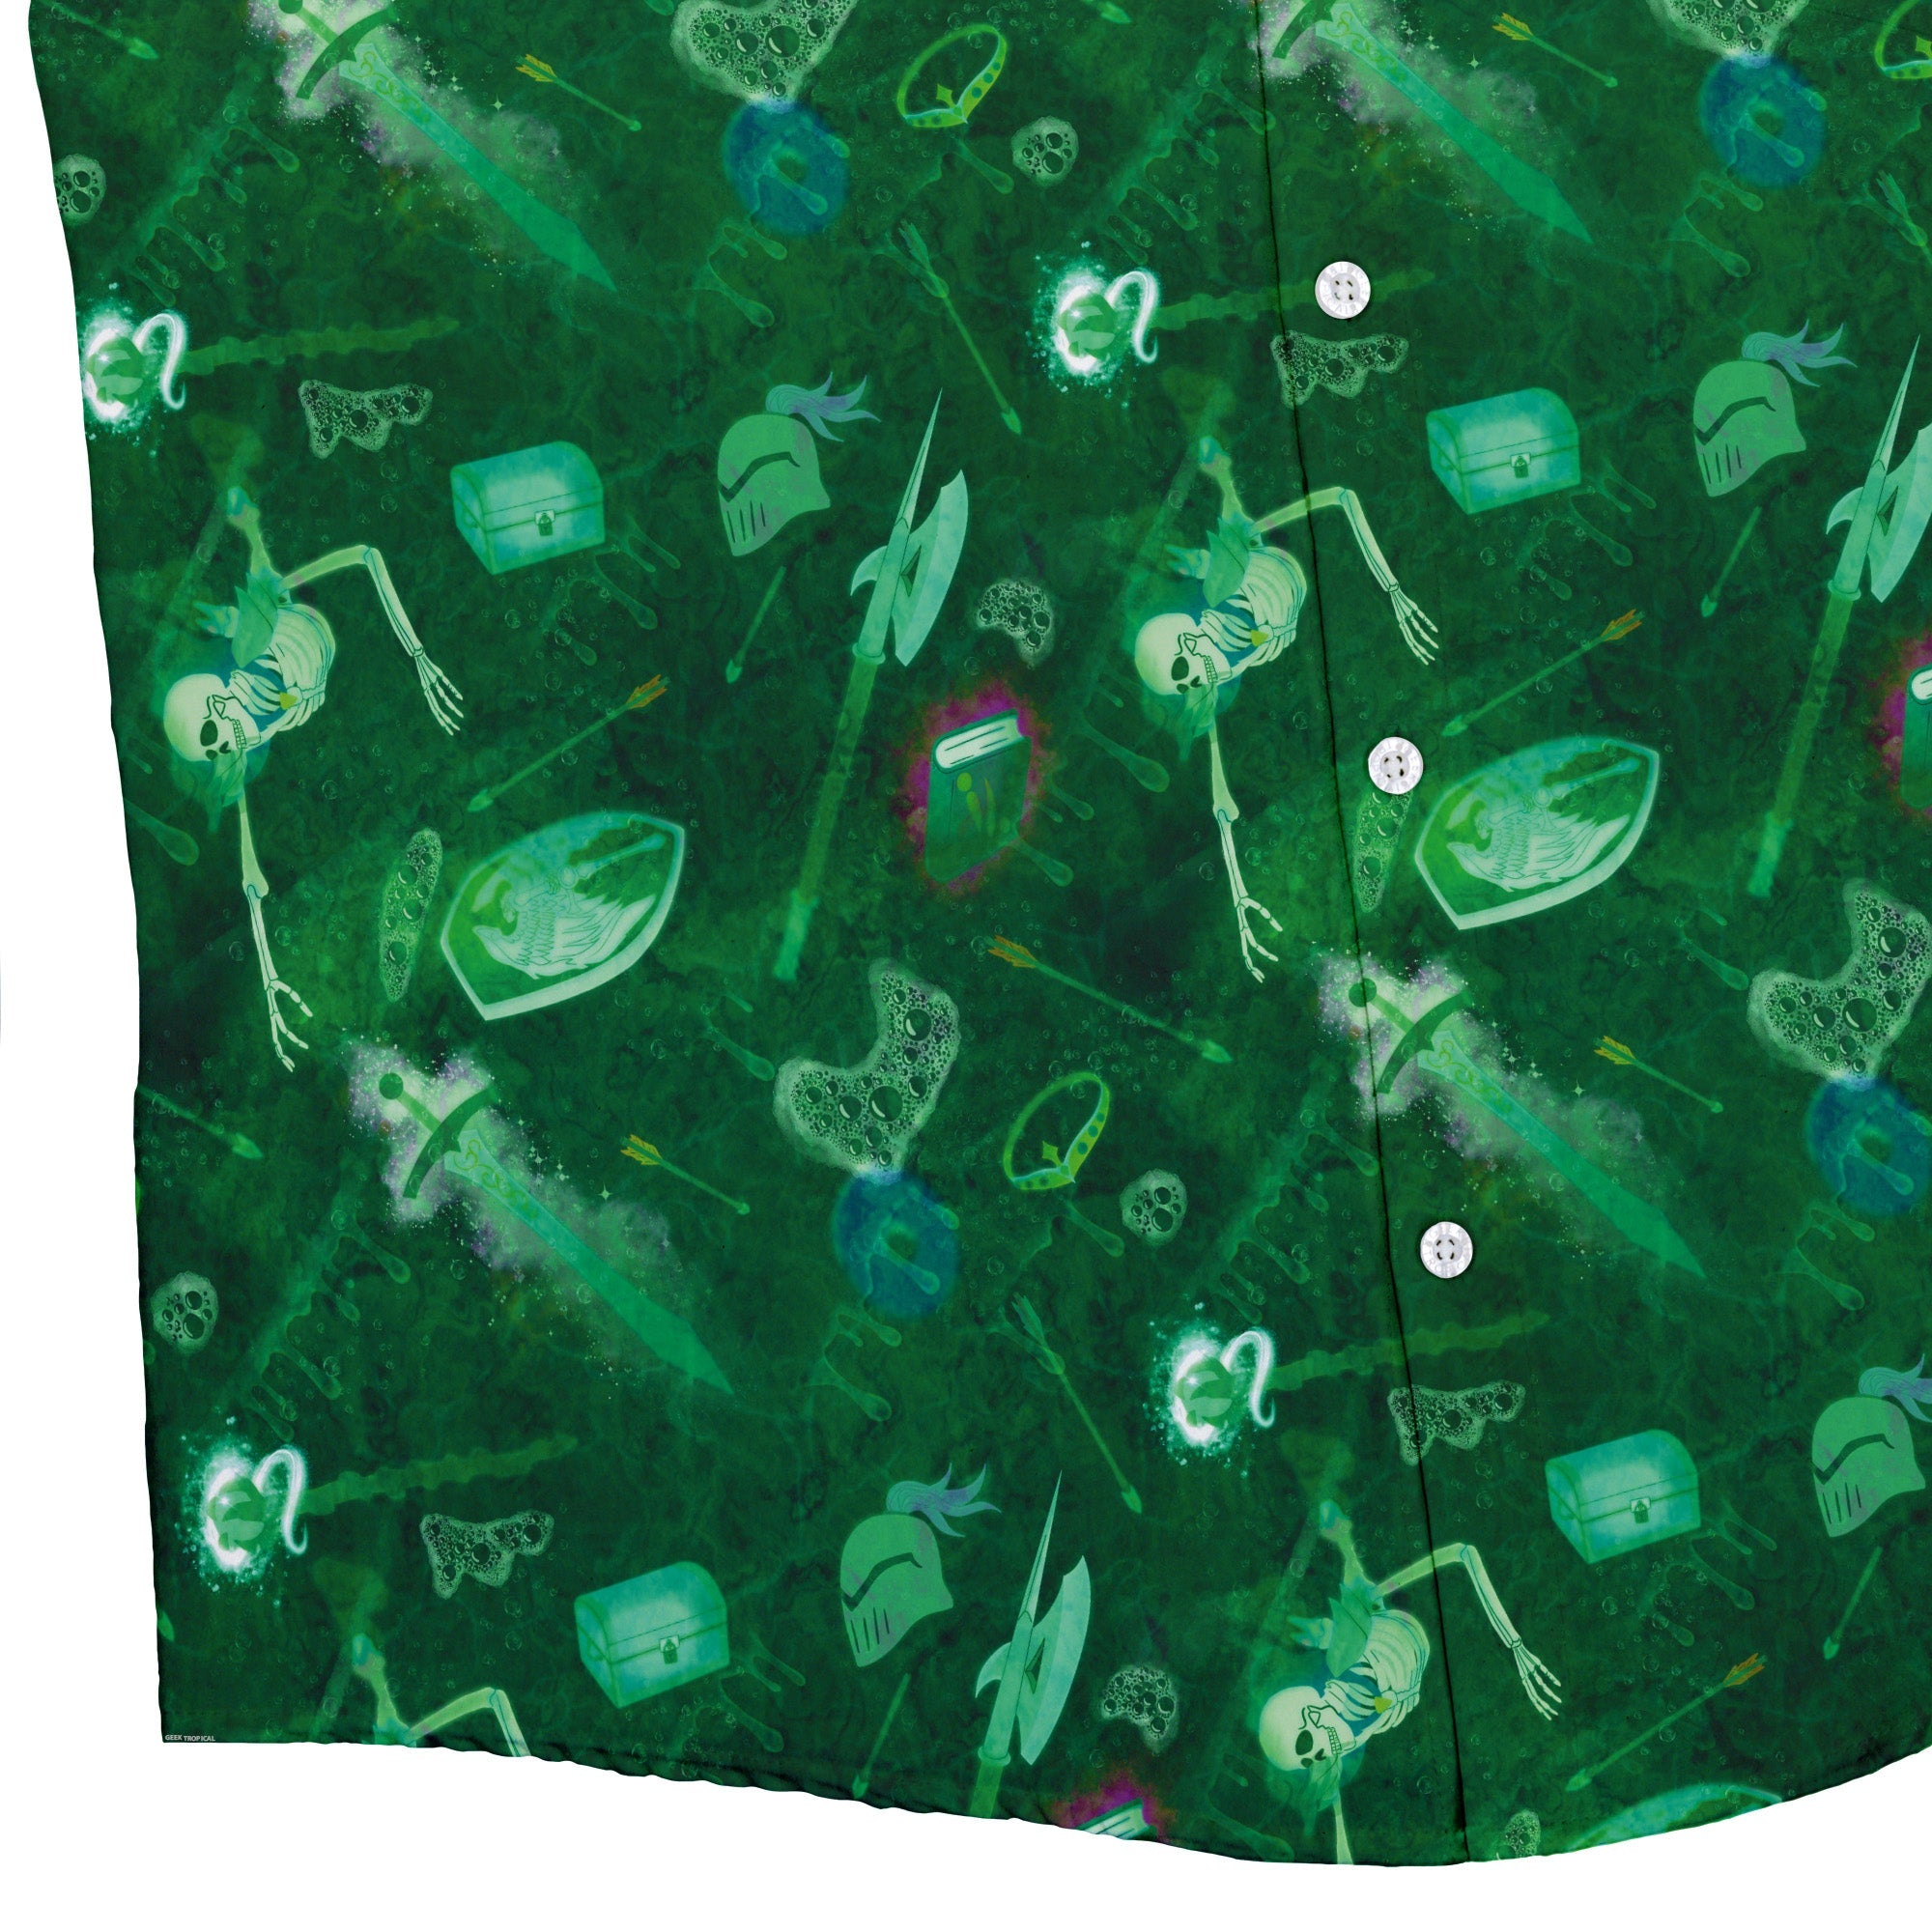 Gelatinous Cube Dnd Monster Button Up Shirt - adult sizing - Designs by Nathan - dnd & rpg print